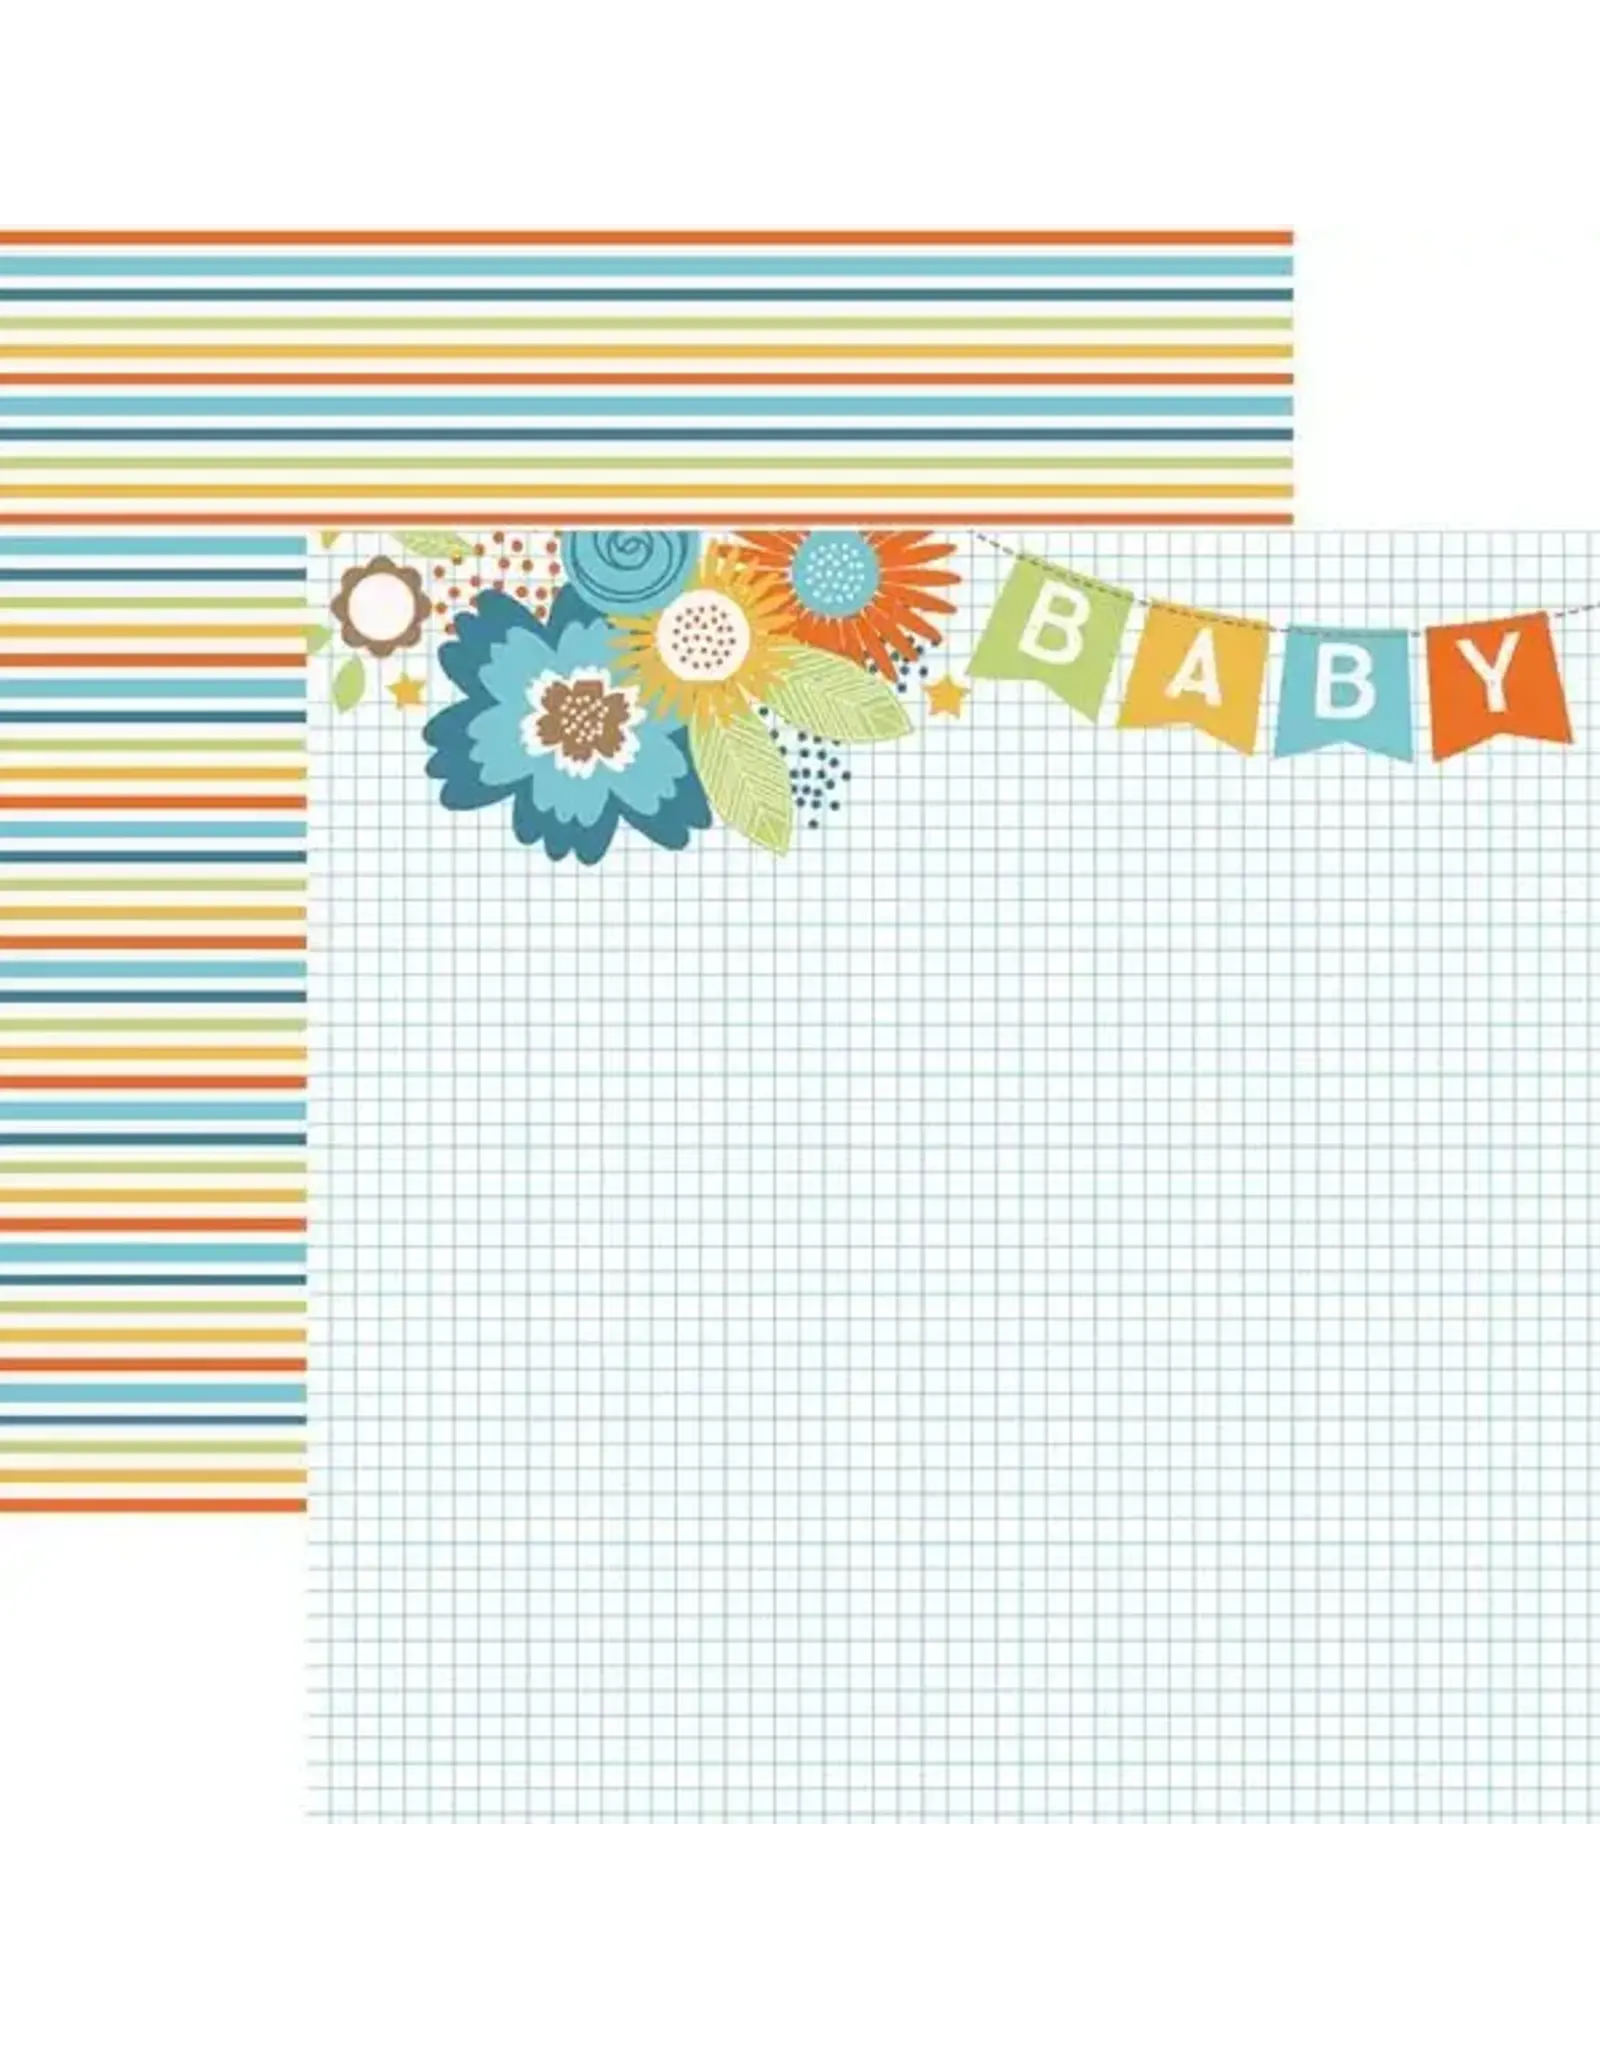 PAPER HOUSE PRODUCTIONS PAPER HOUSE HELLO BABY BABY BOY BANNER 12X12 CARDSTOCK